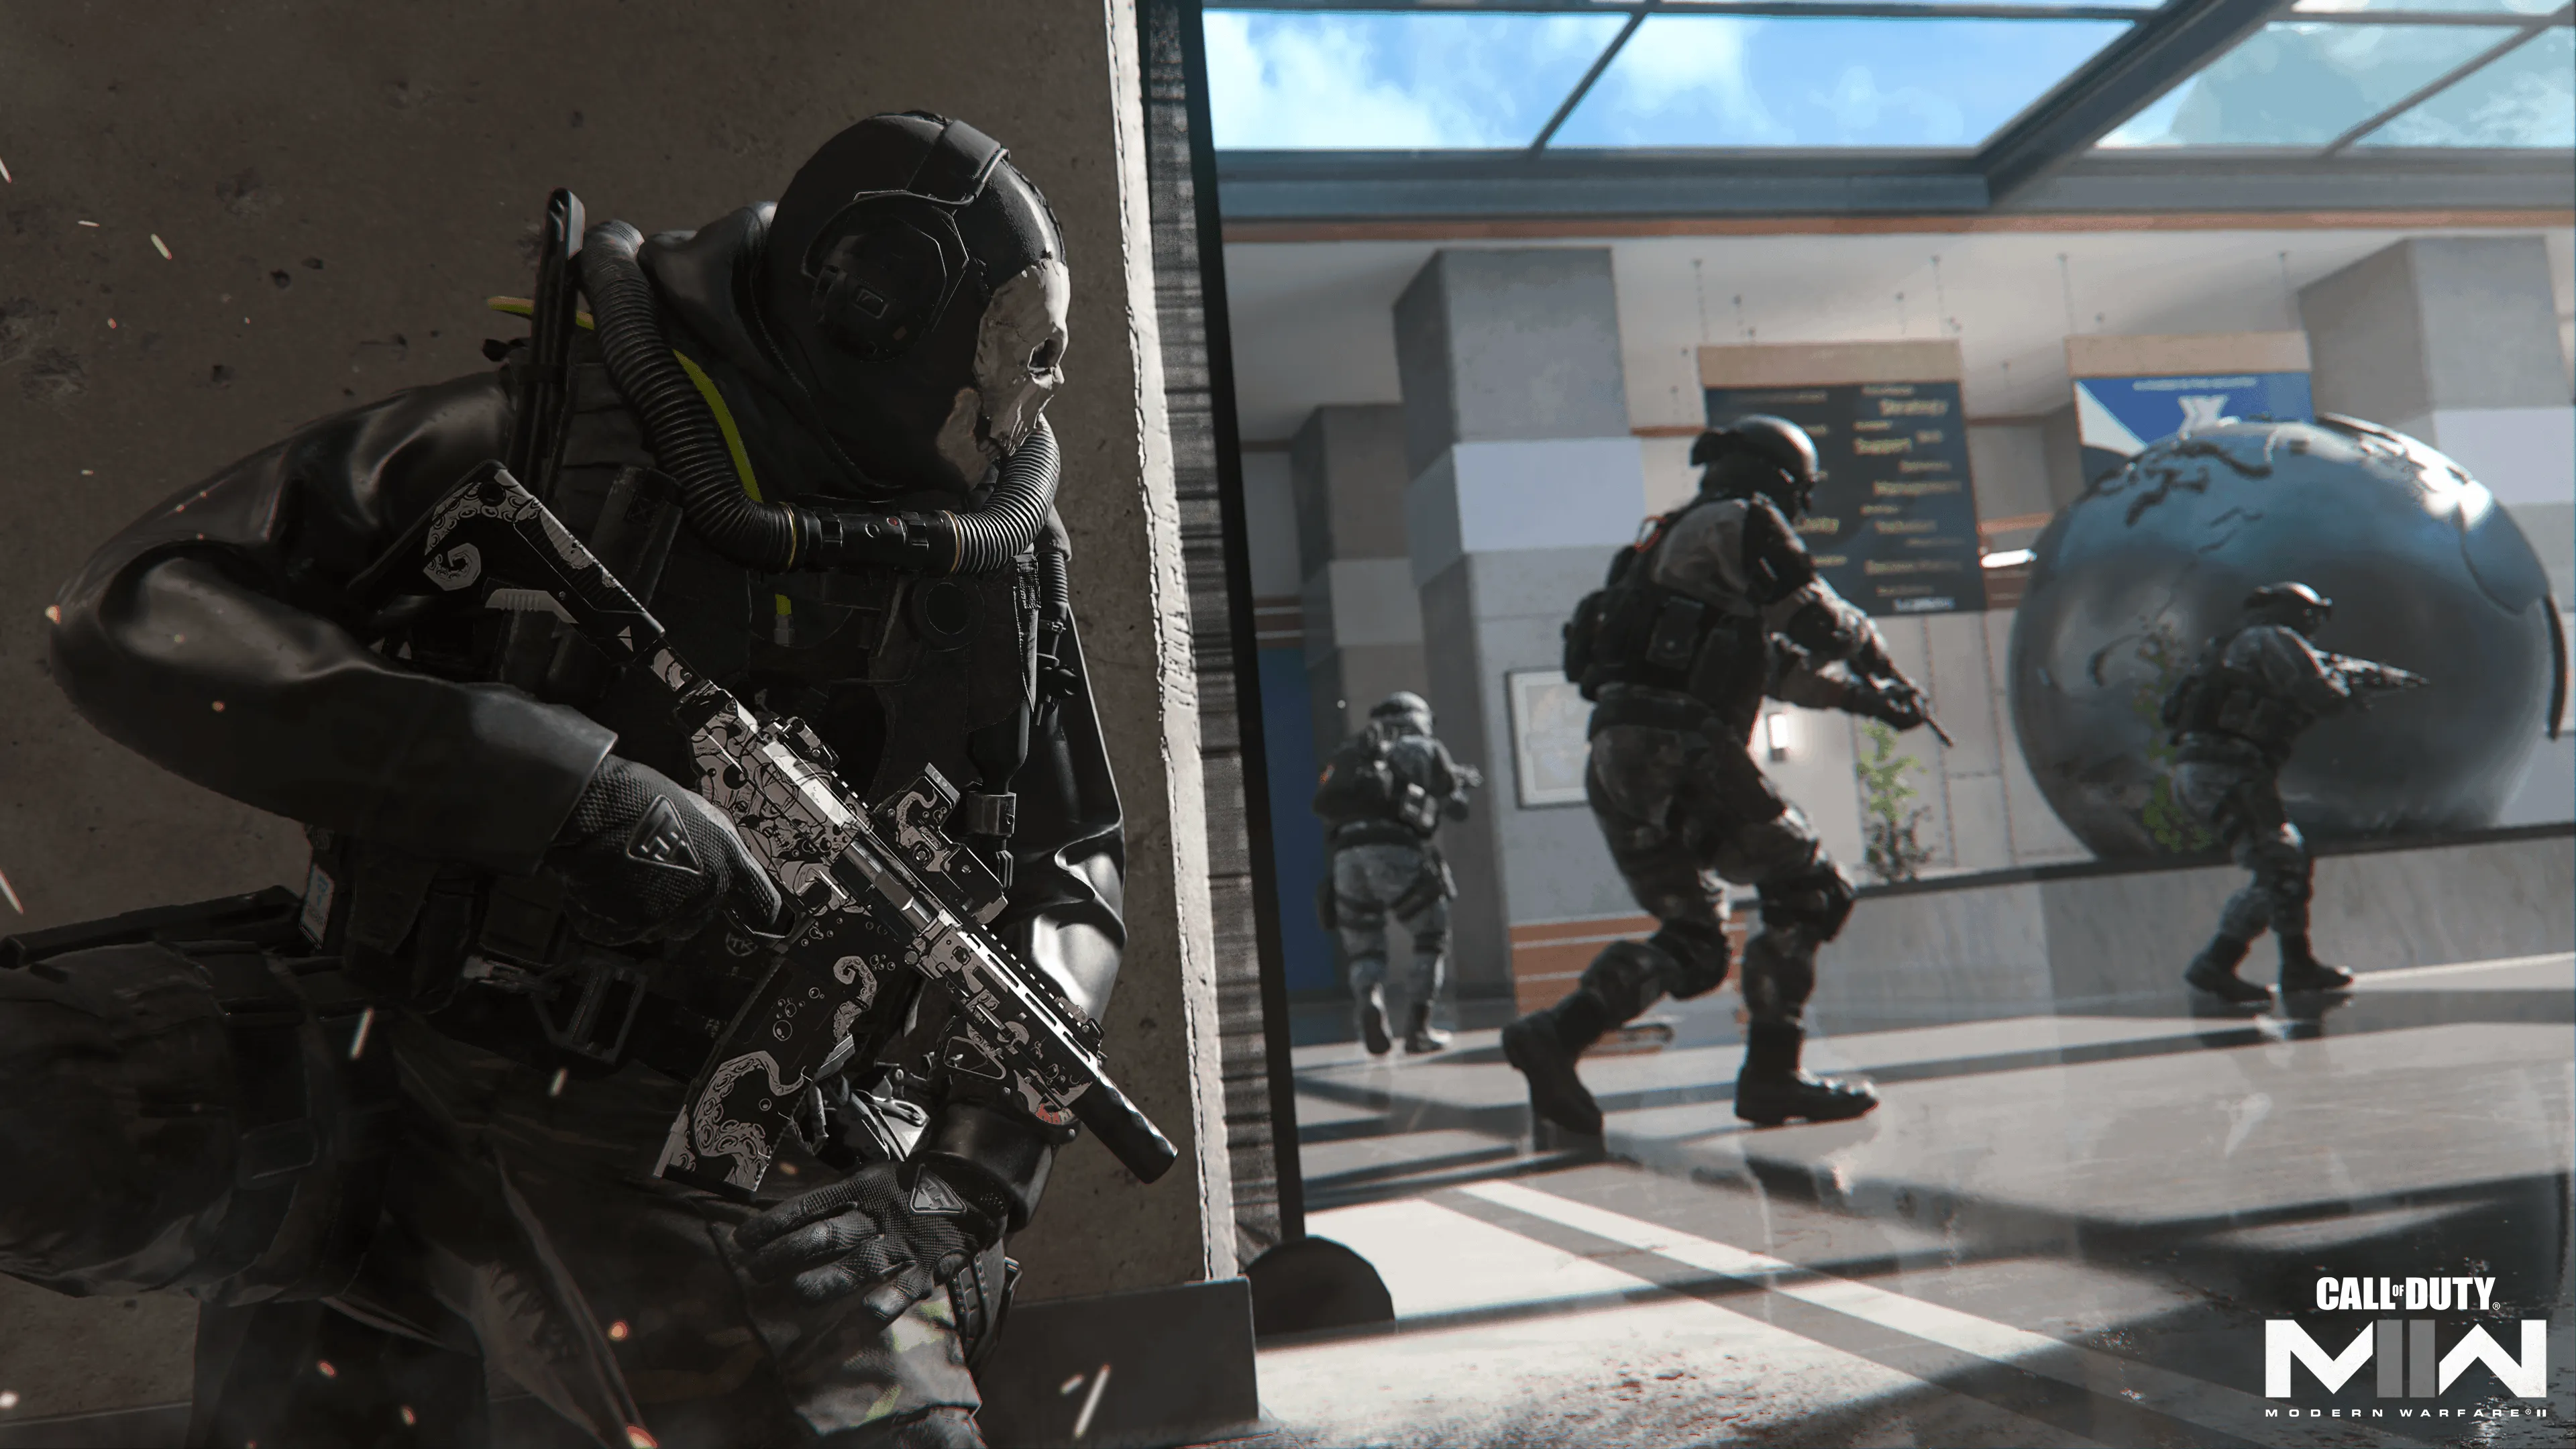 Modern Warfare 3 Comes Out In Nov, Will Have Slide Canceling